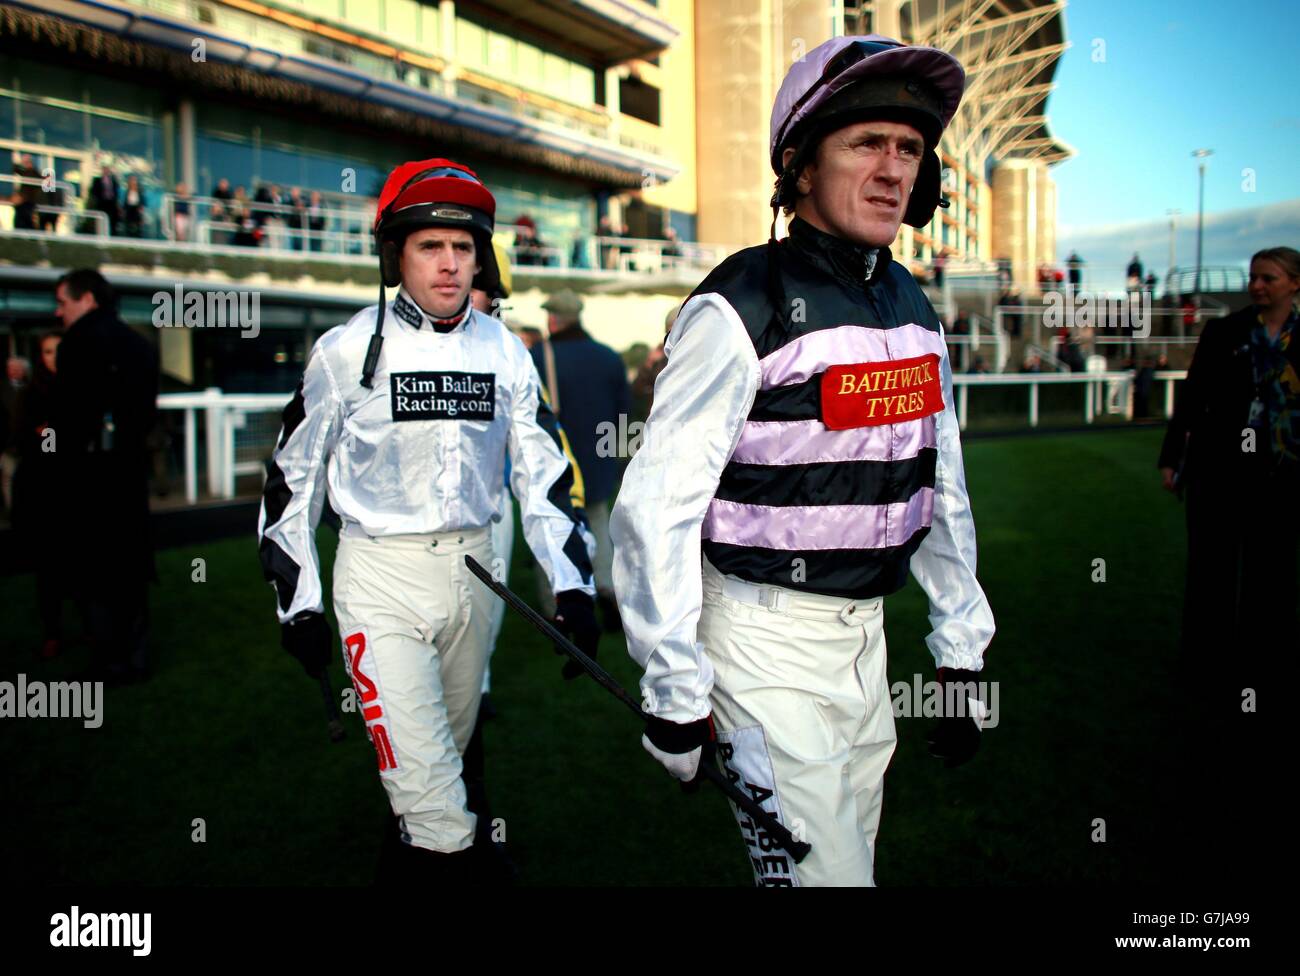 Horse Racing - 2014 Christmas Meeting - Day One - Ascot Racecourse. Jockey A.P.McCoy on Day One of the 2014 Christmas Meeting at Ascot Racecourse. Stock Photo